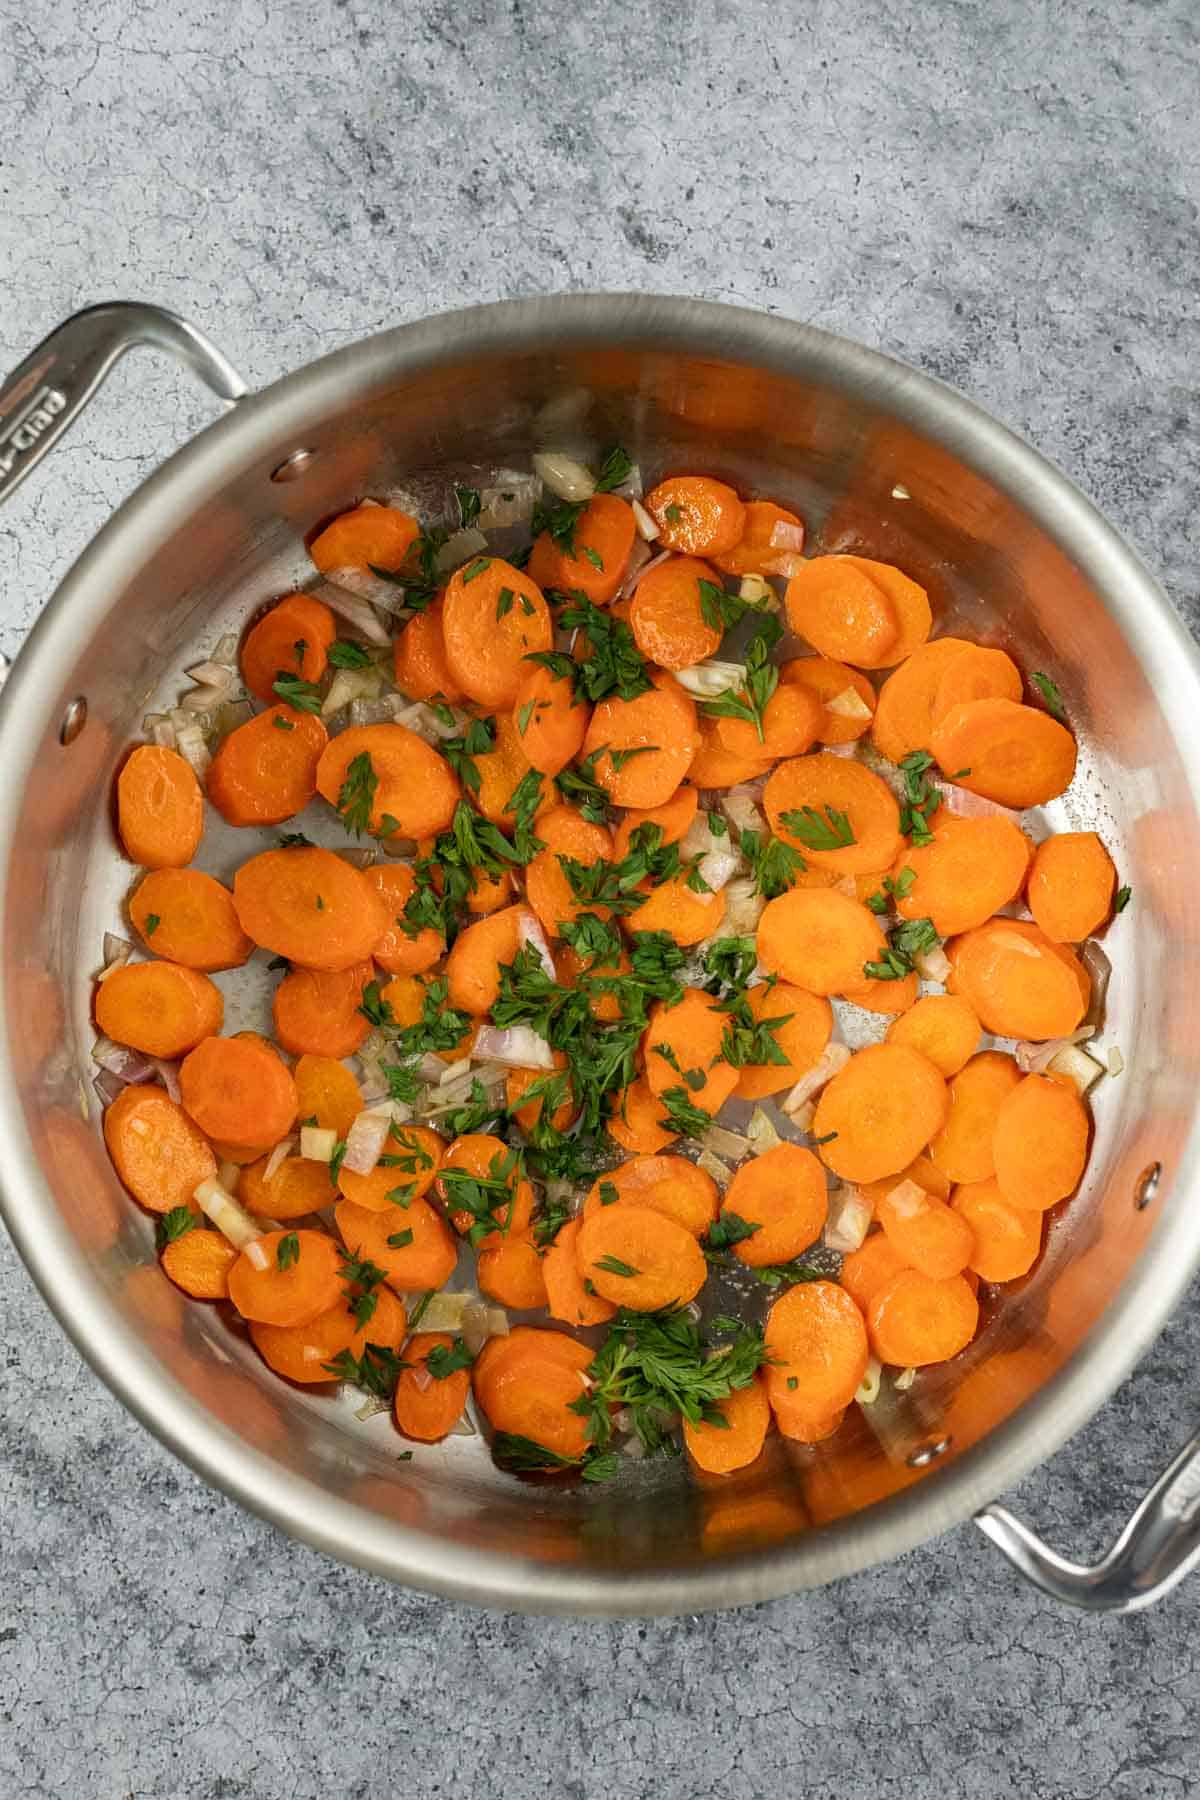 carrot coins and shallot sauteing in oil with finely chopped carrot greens added to the pan.